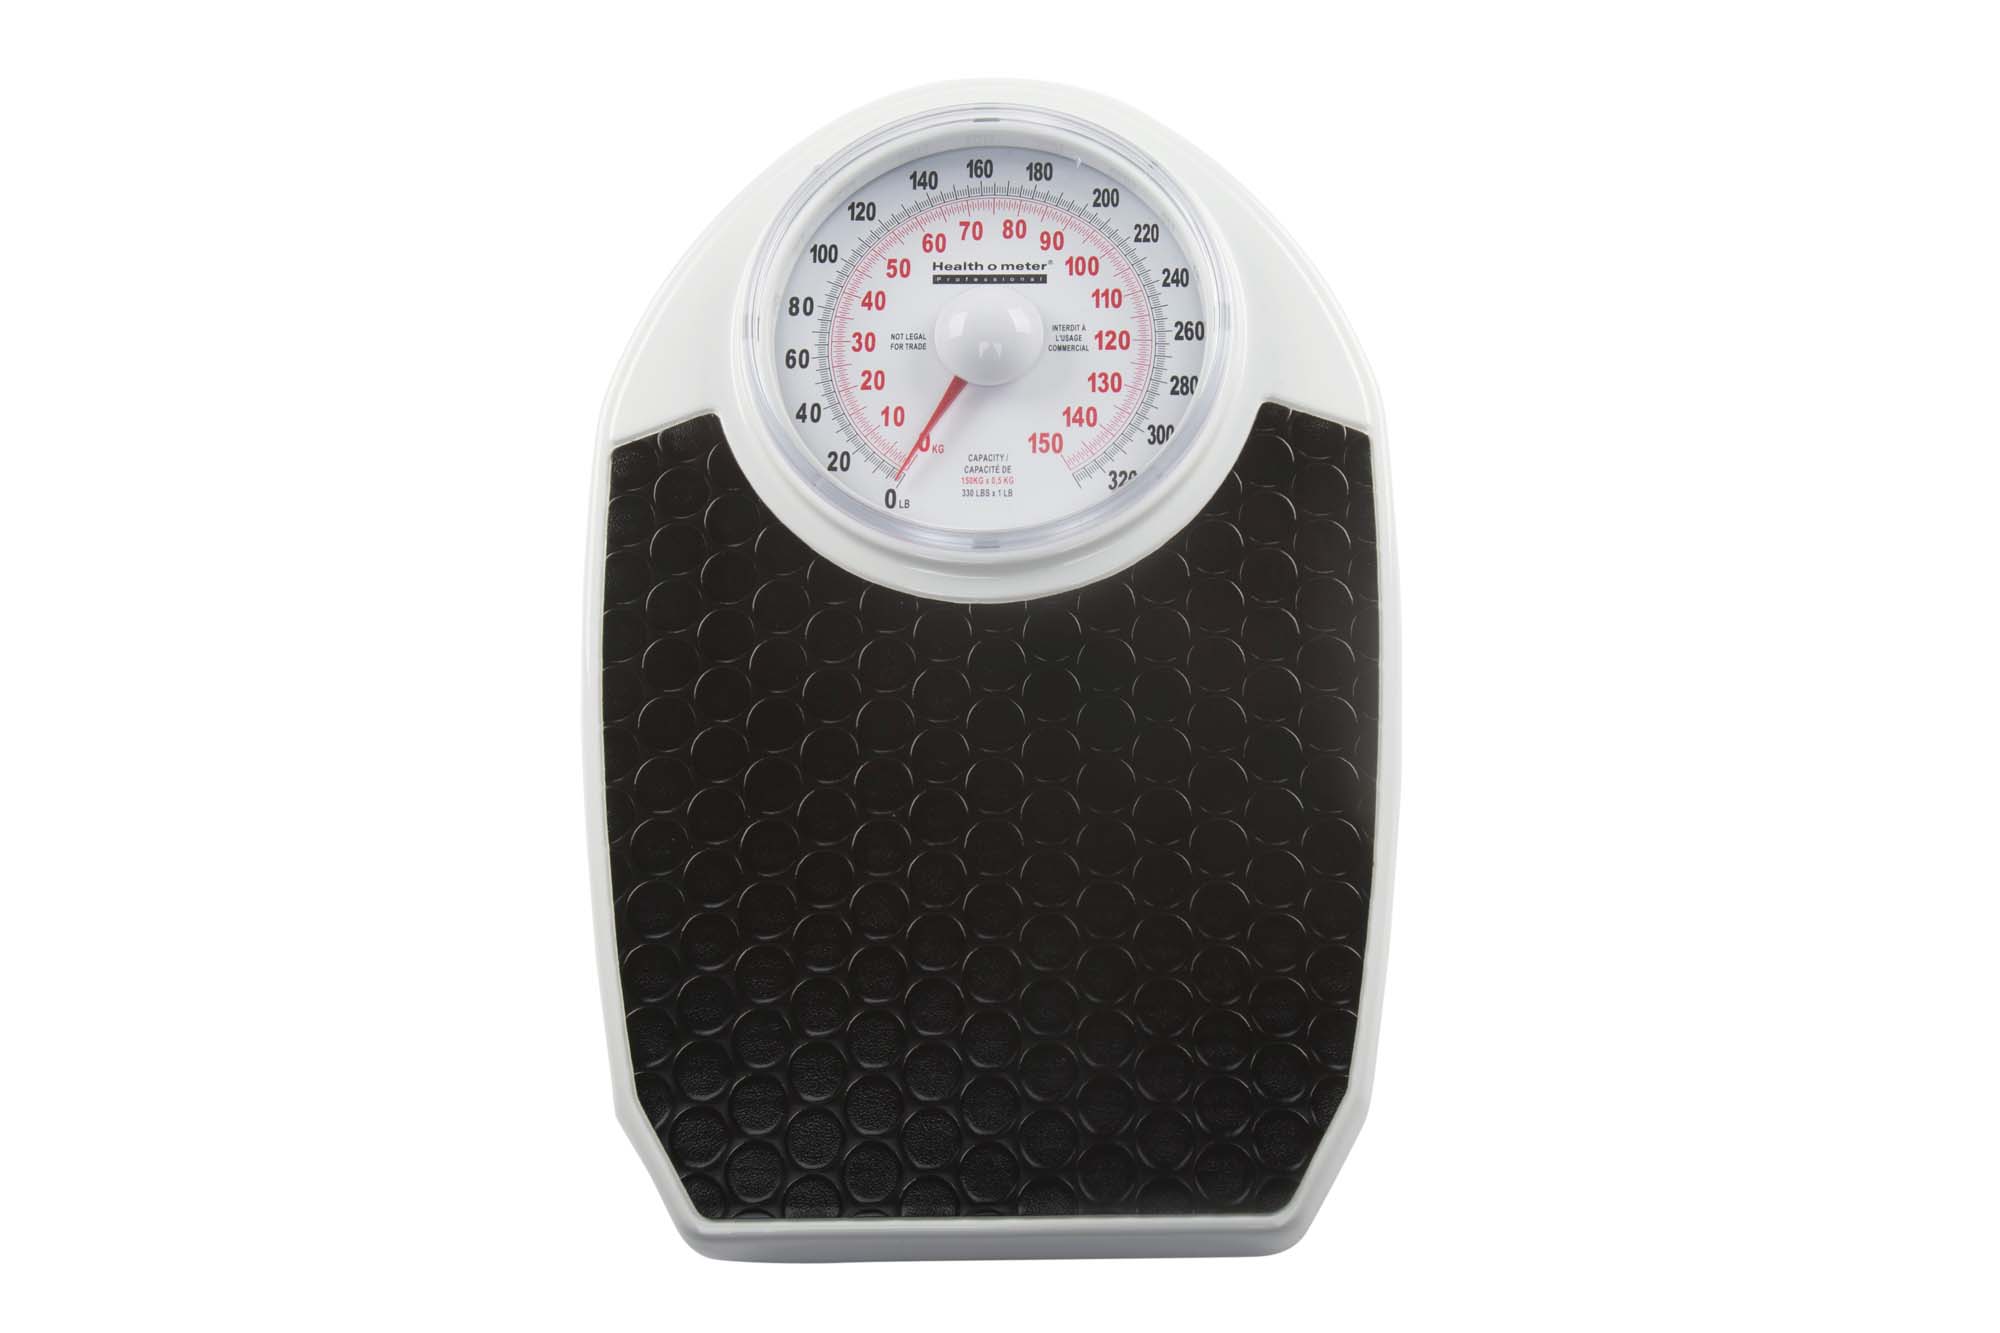 Health O Meter Antimicrobial Dial Bathroom Scale